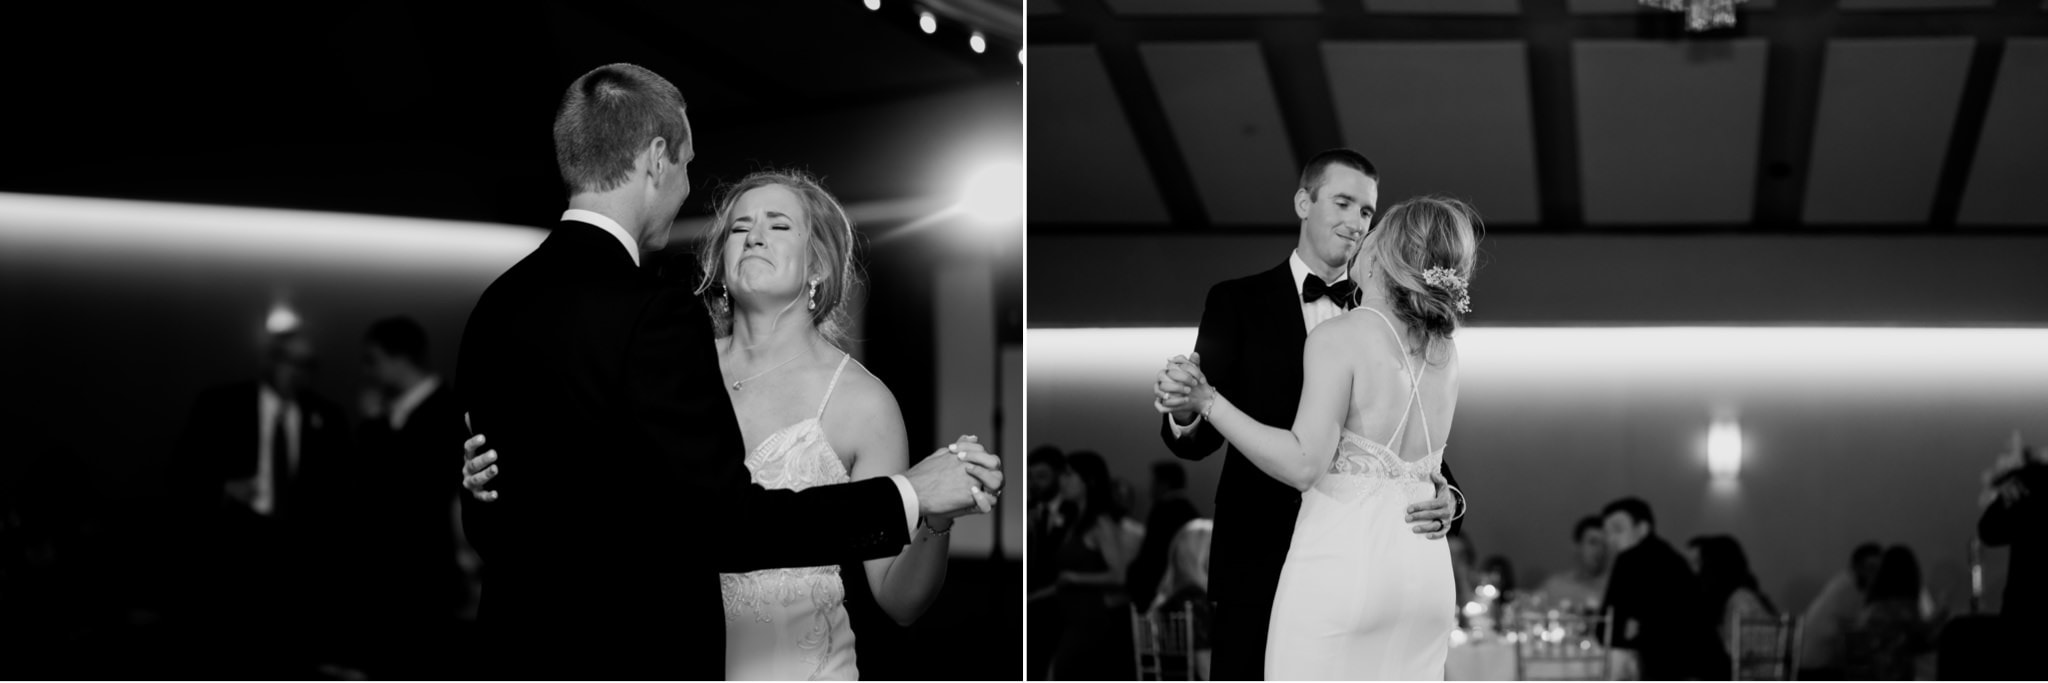 bride and groom first dance at Des Moines Golf and Country Club